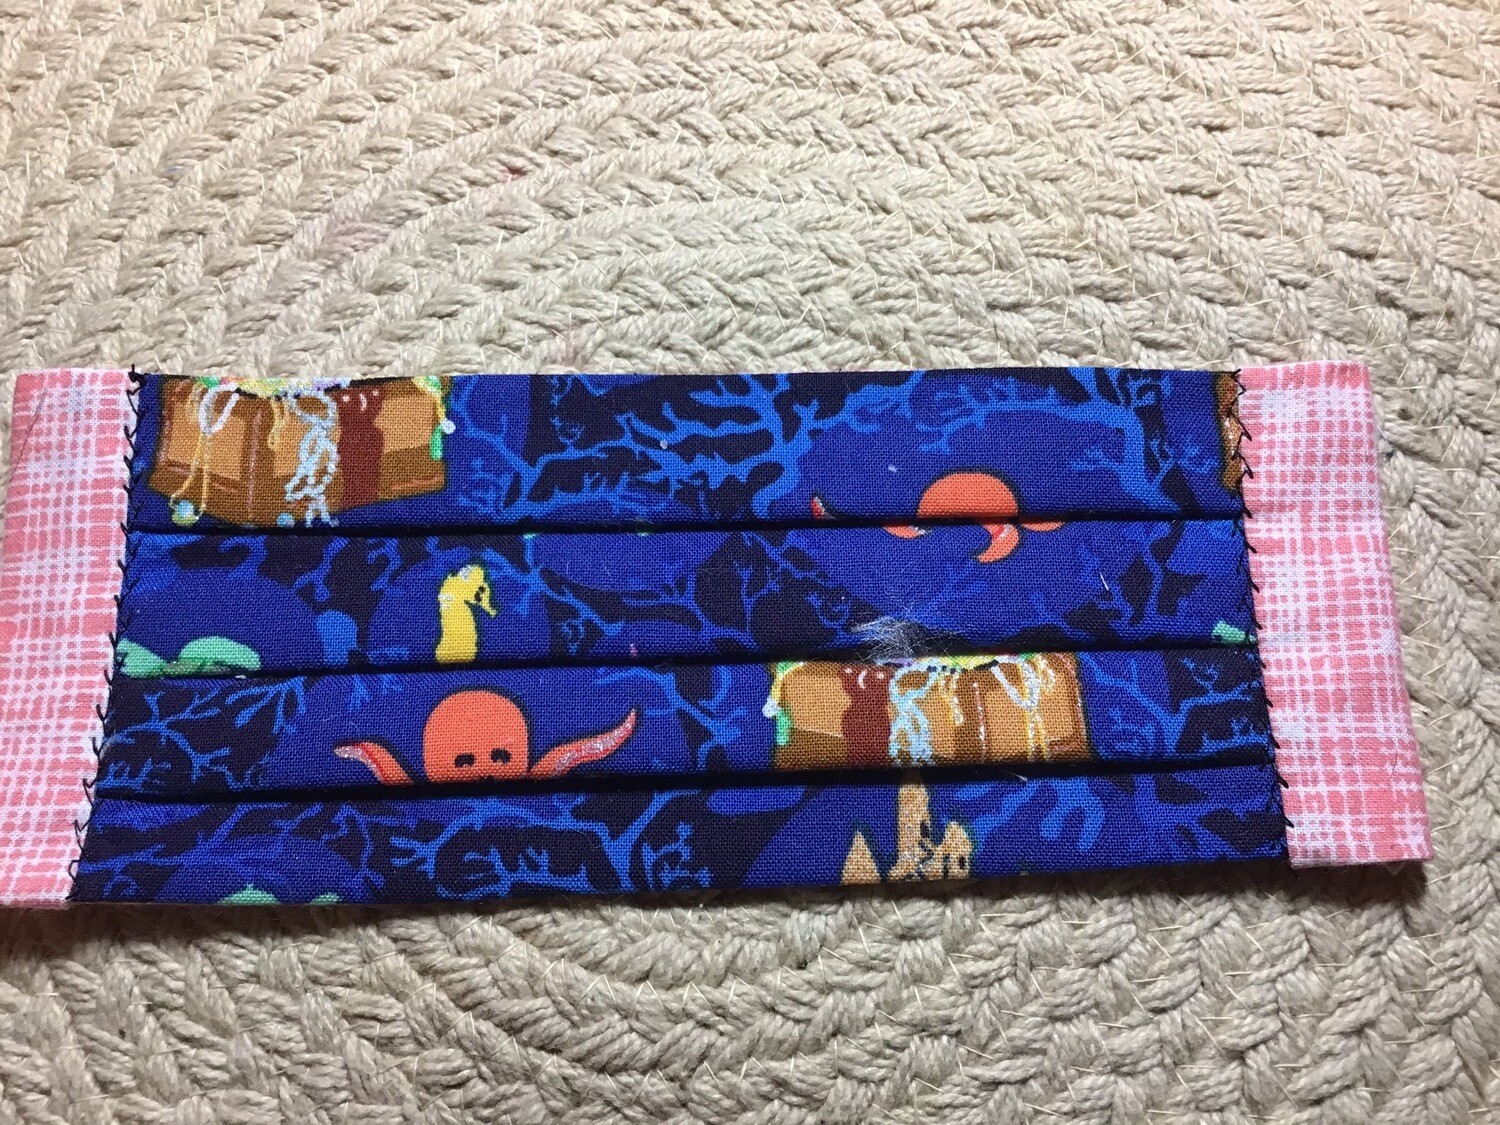 Artisan Under The Sea- Measures 61/2”- 2 Elastic Straps Included